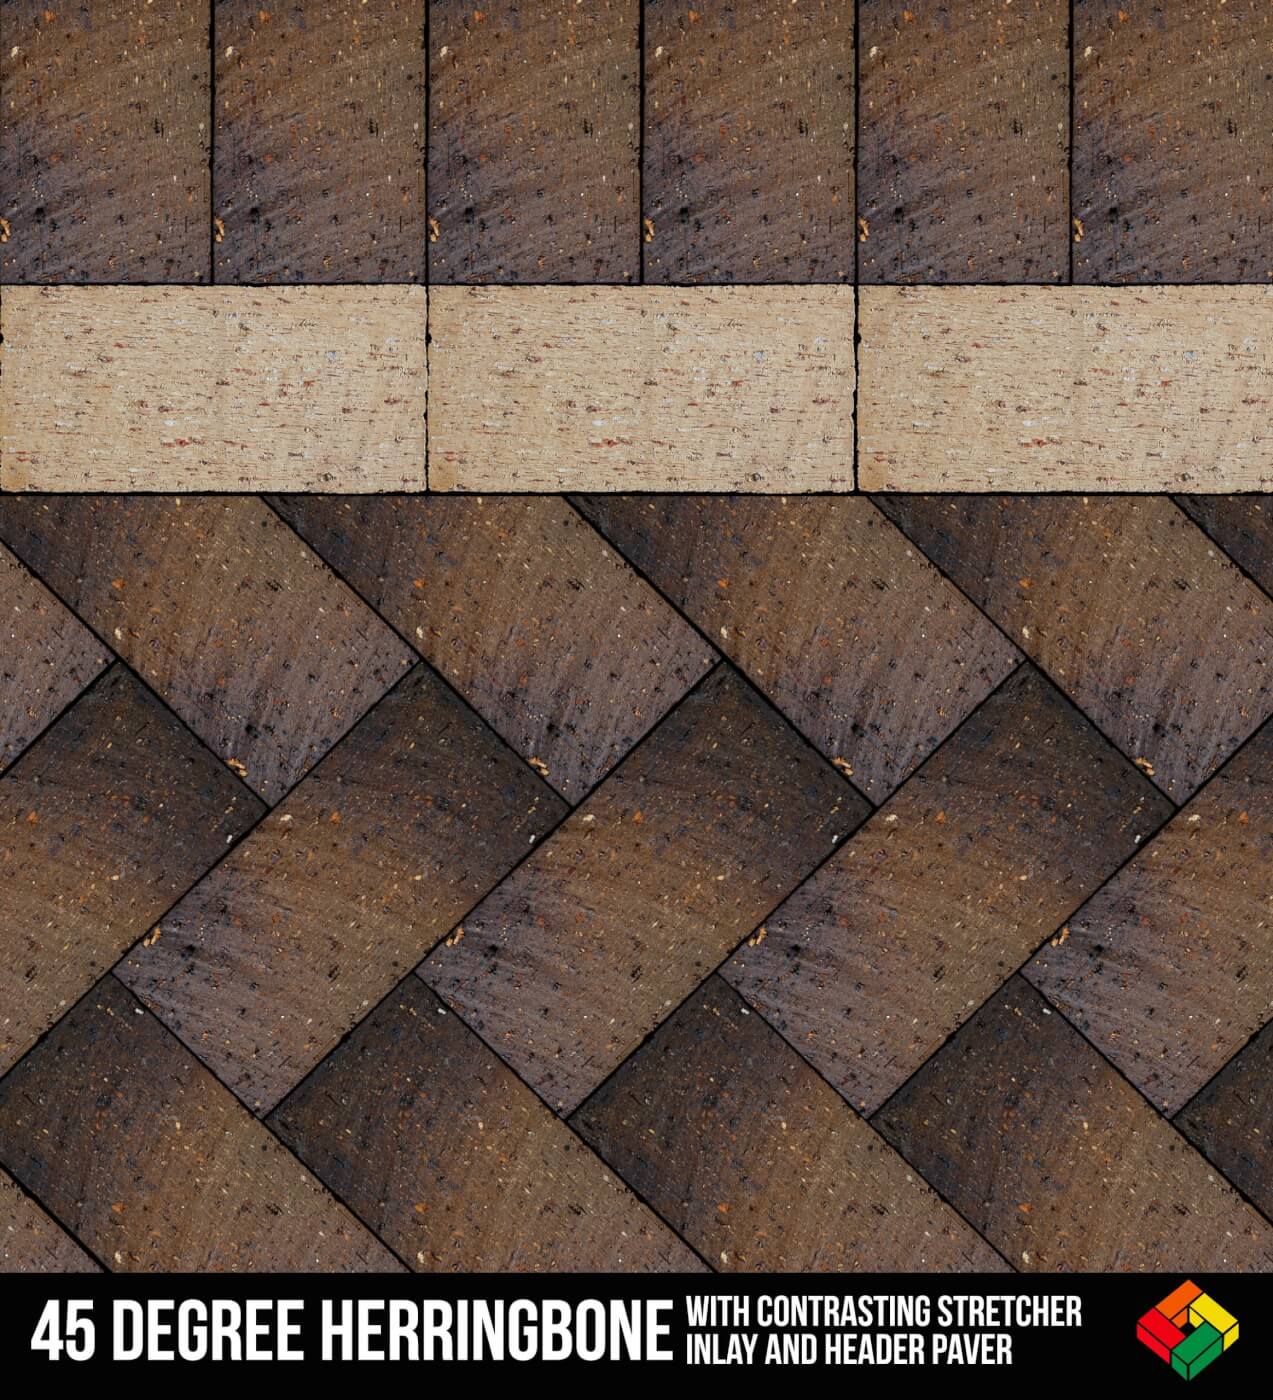 45 Degree Herringbone With Contrasting Stretcher Inlay And Header Paver